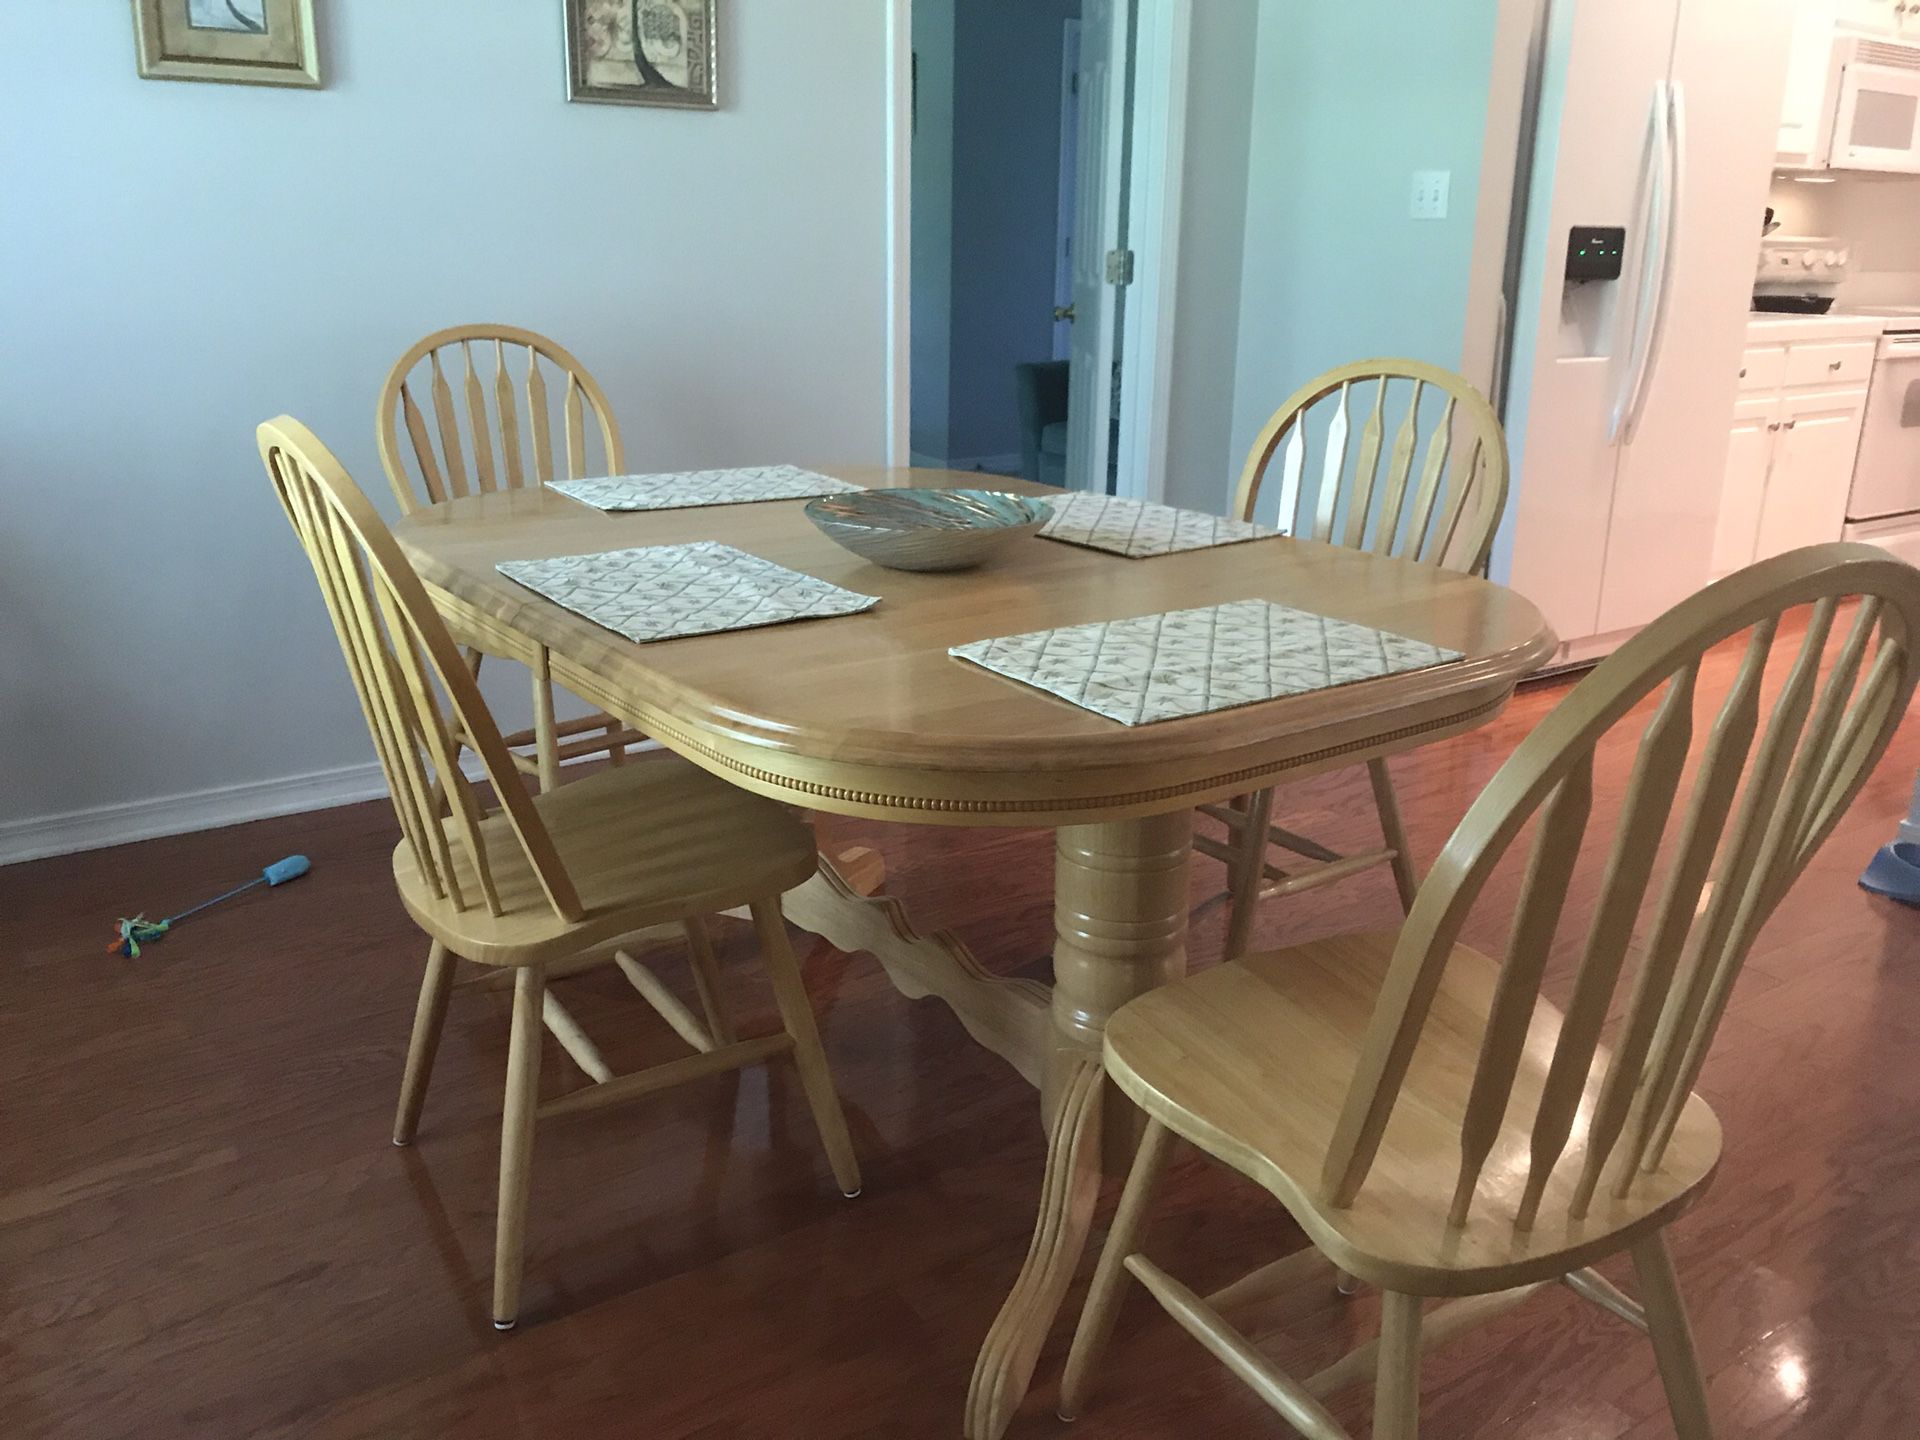 Dinning room table with leaves and 4 chairs and more...